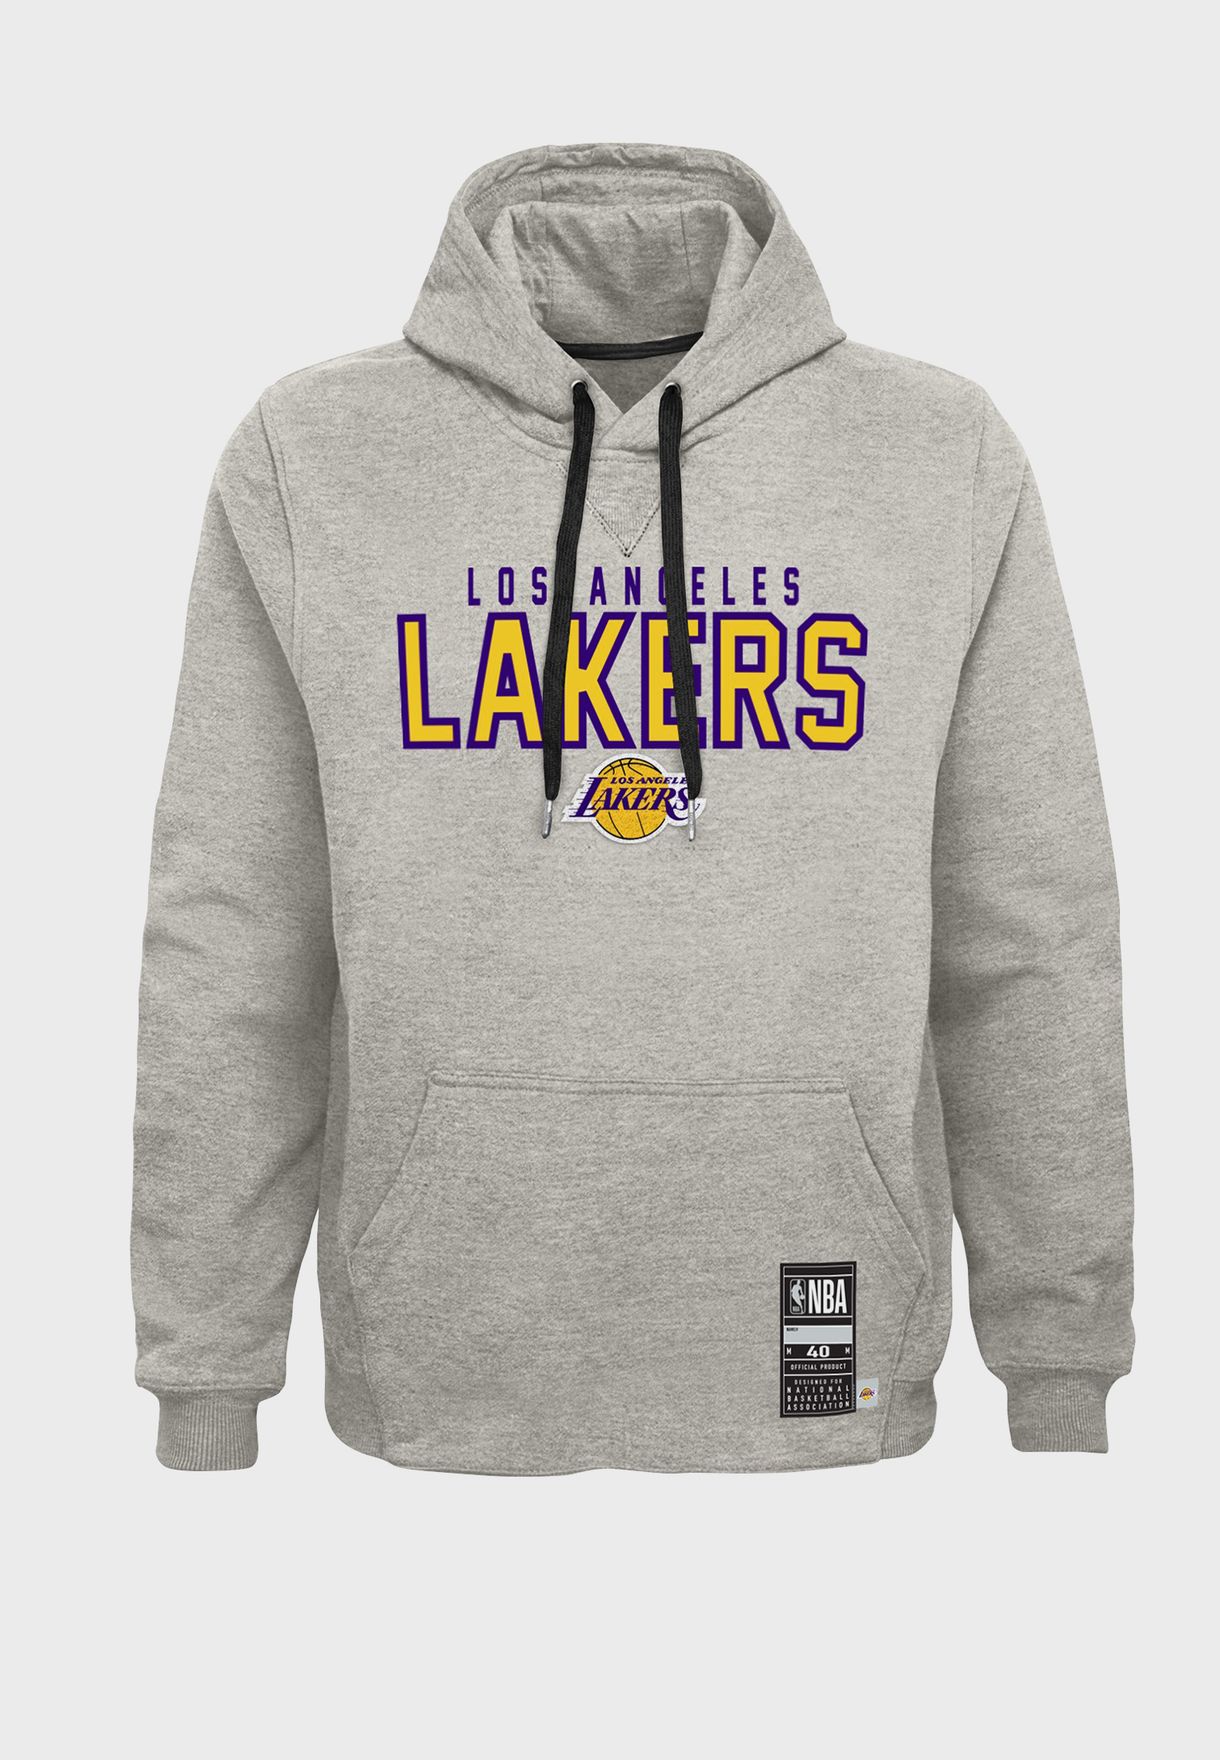 S OuterStuff Los Angeles Lakers Hoody Goat Po Hoody Lebron James Grey 